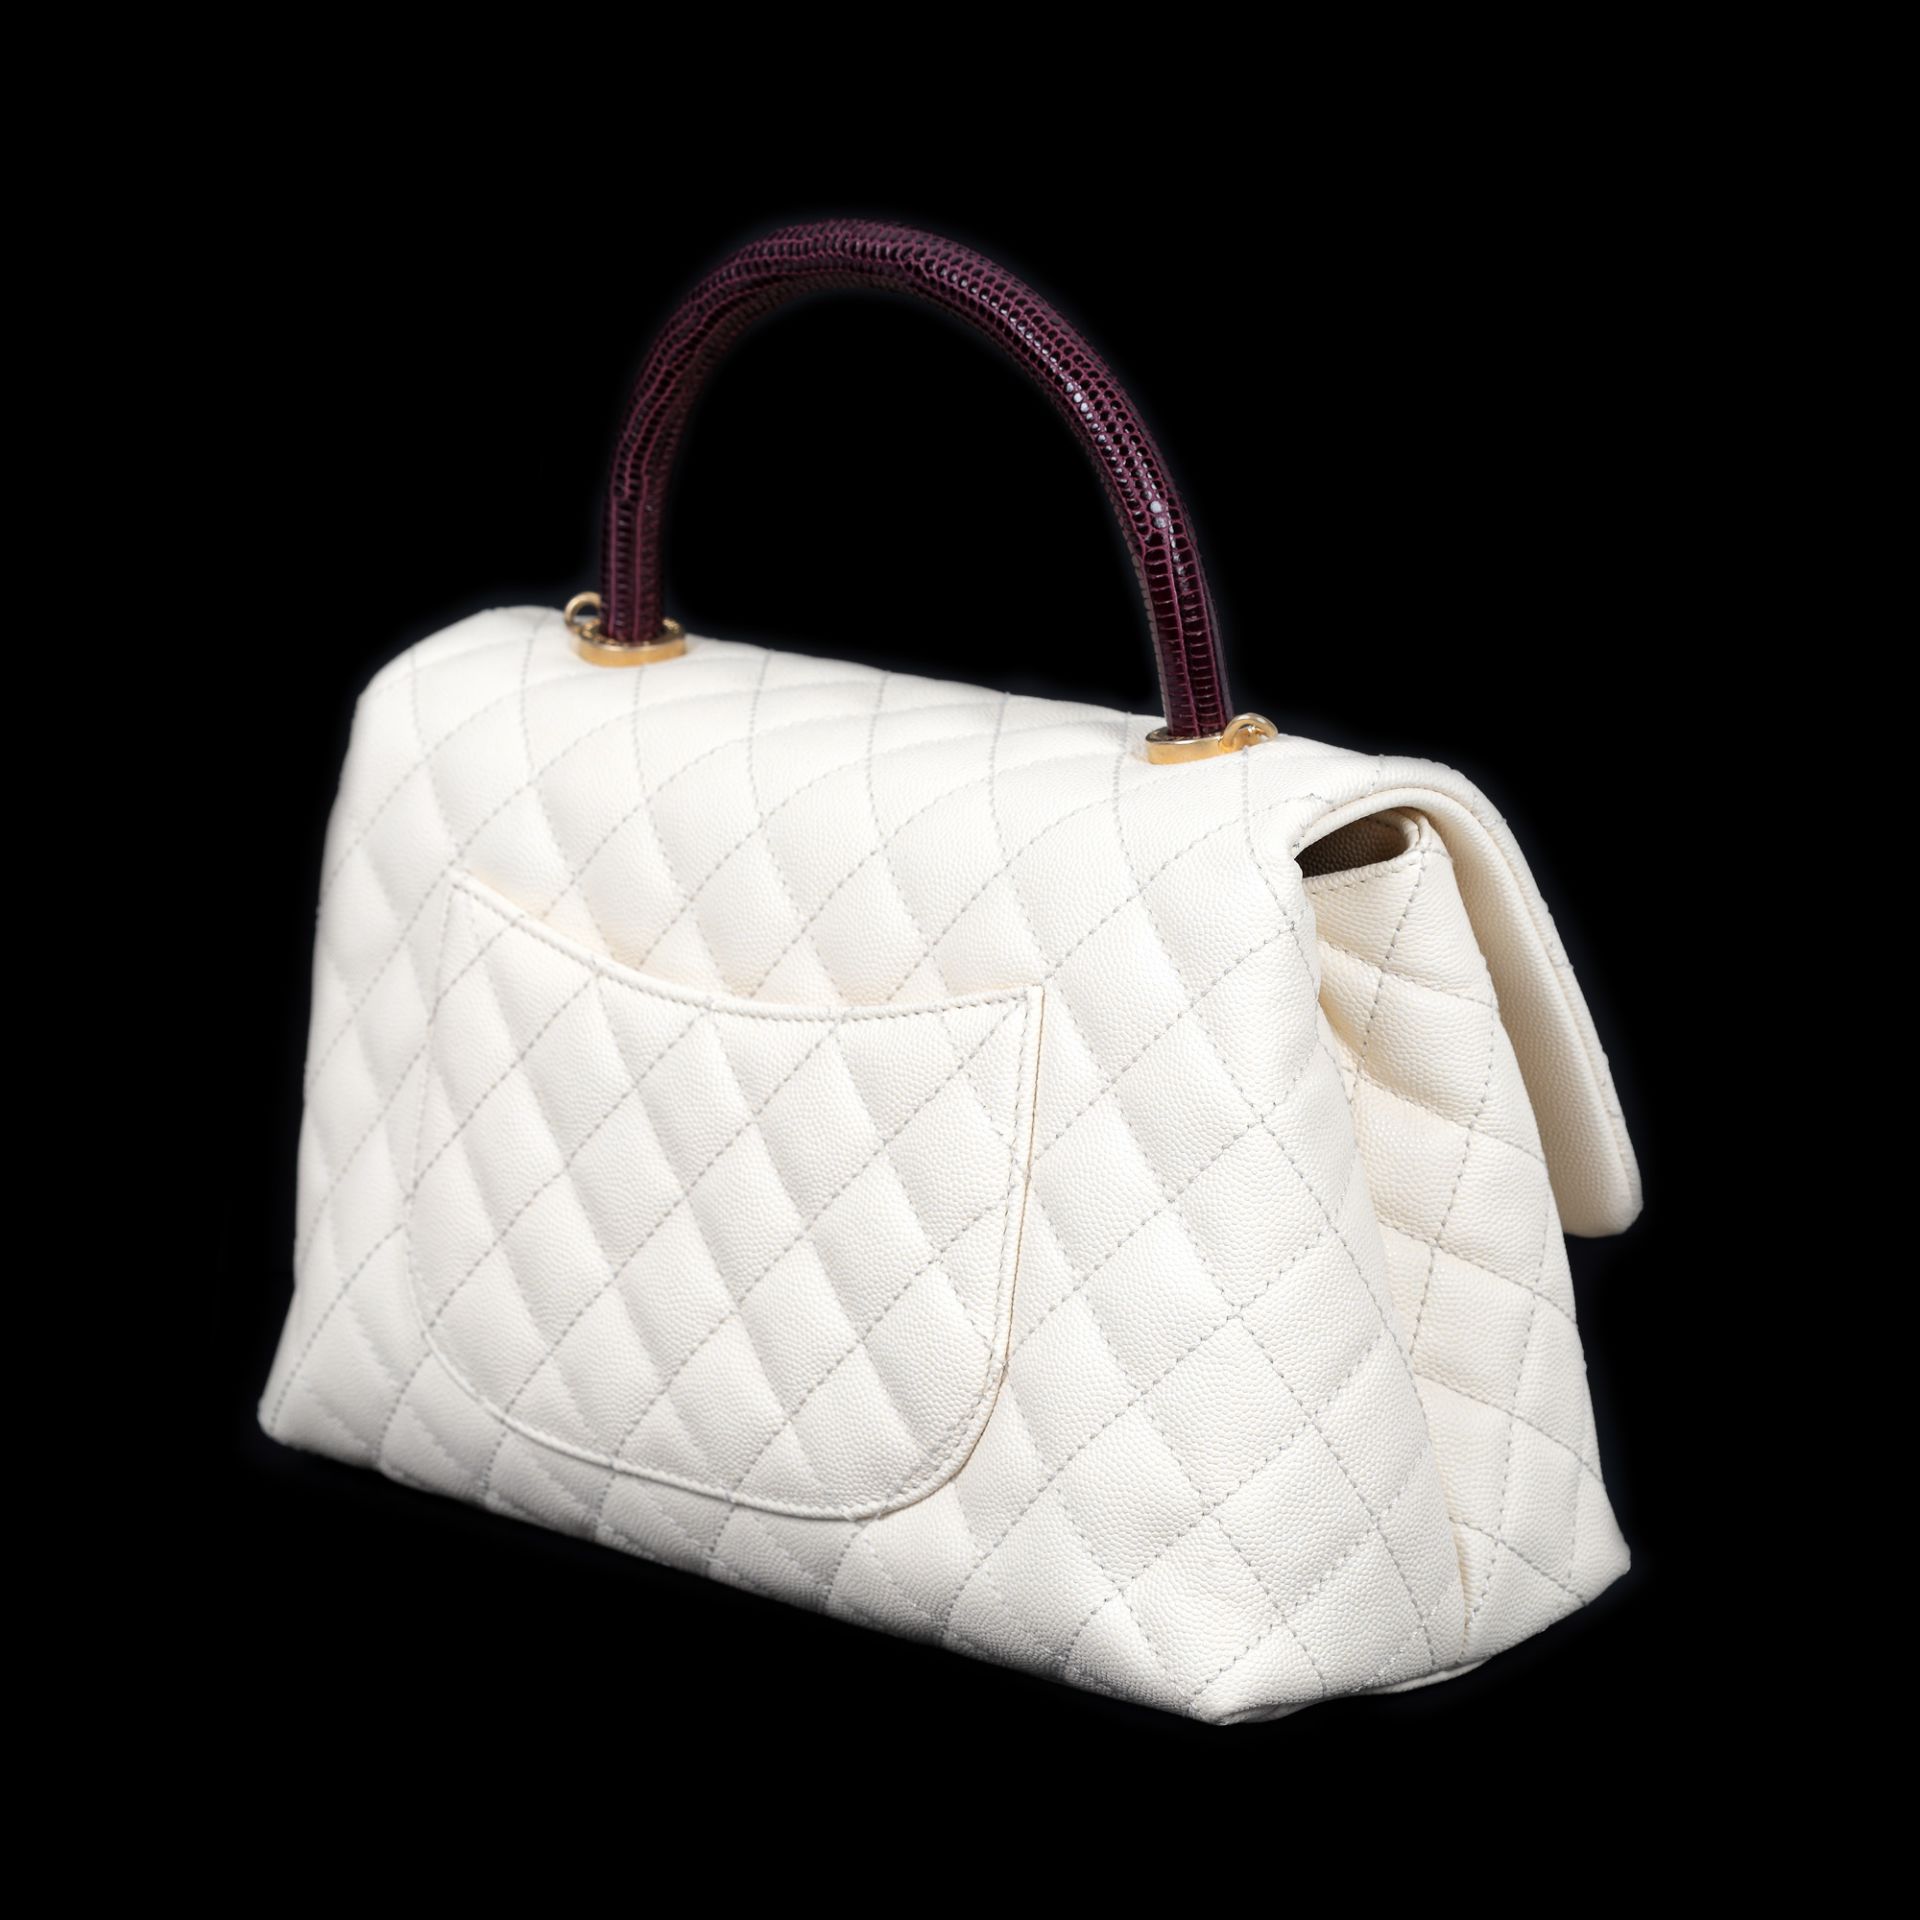 "Coco Handle Bag" - Chanel bag, quilted leather, white, lizard leather handle, burgundy - Image 4 of 11